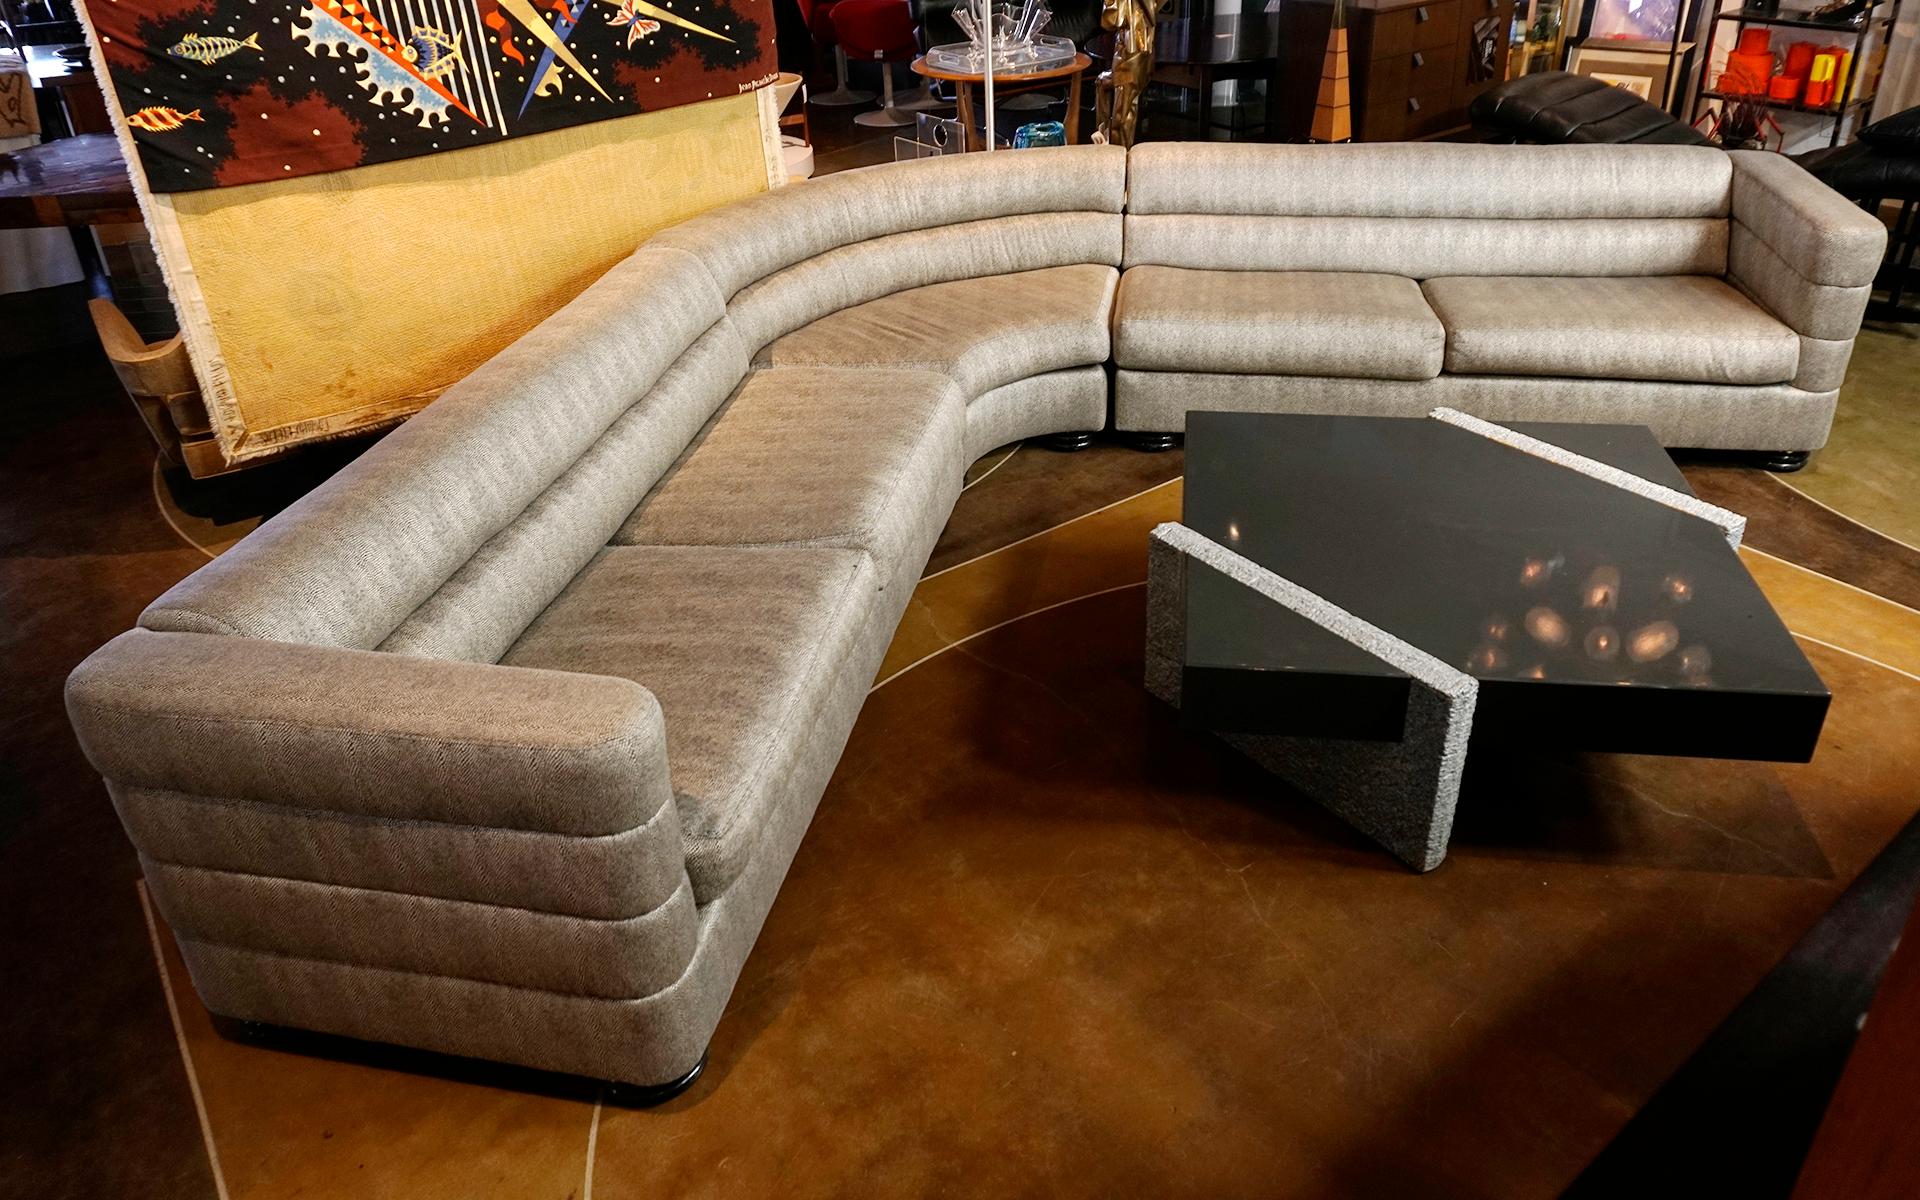 L shaped sectional sofa by Directional in a beautiful black and white patterned fabric with a snakeskin like appearance.  This is from the original owner and was placed in a large, rarely used living room.  There are few if any signs of use.  VERY